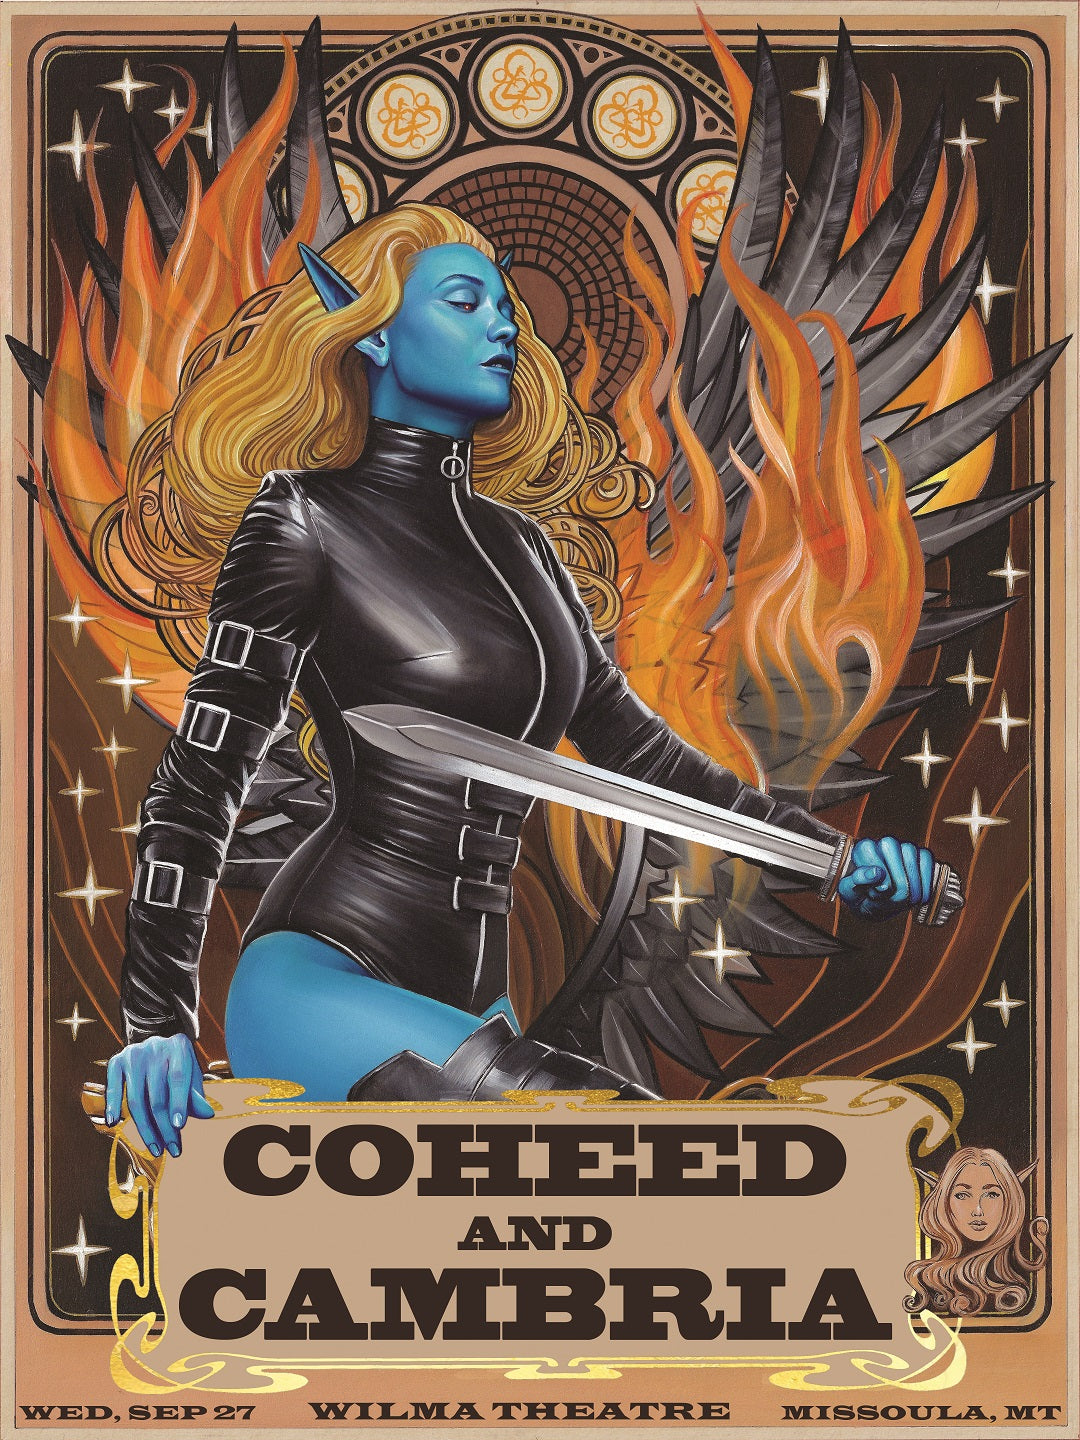 Limited to 10 AP Fred Ian Coheed and Cambria 18x24